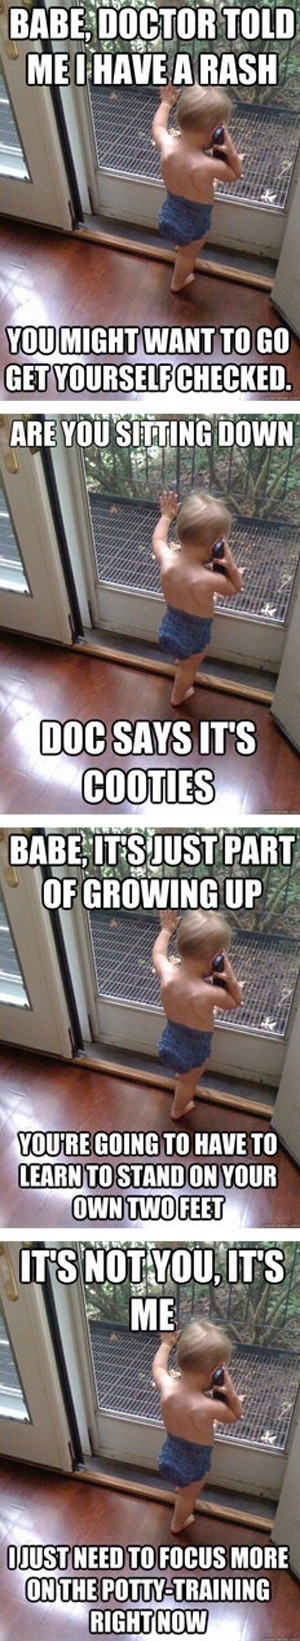 The doc said it's cooties